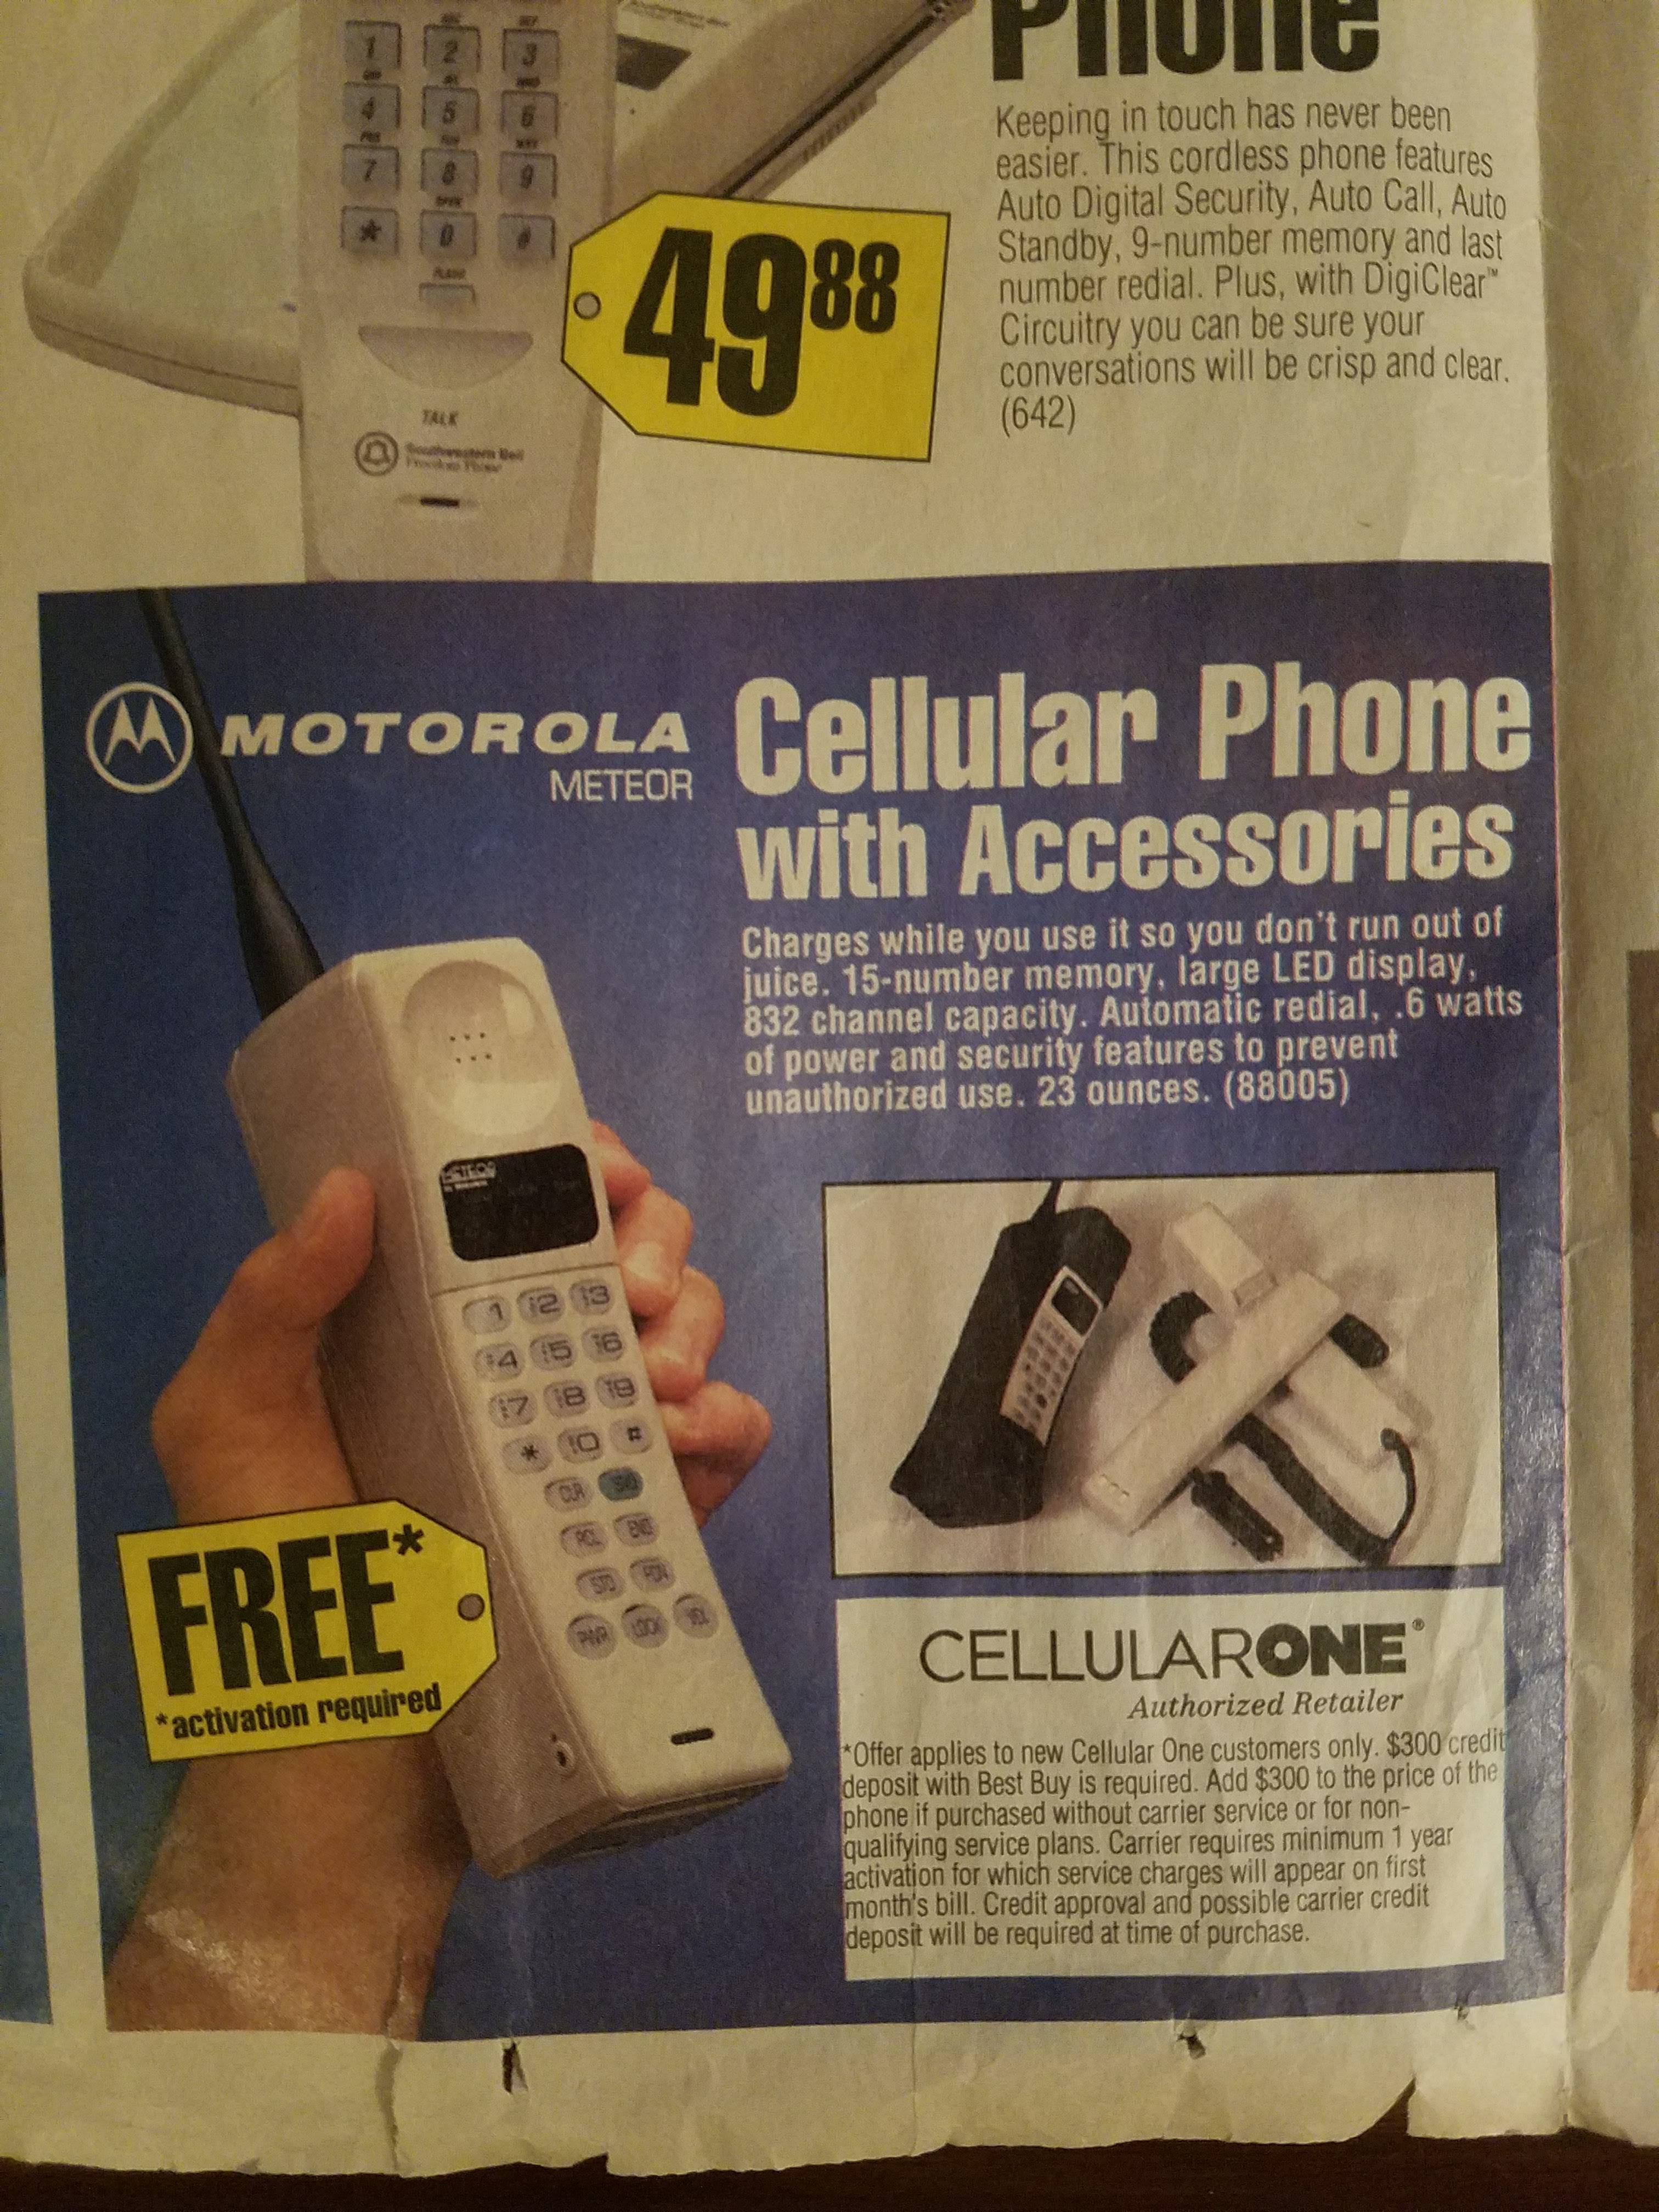 1994 best buy ad - Ptunic 4988 Keing in touch as ever been Bier This poiss phone com Auto Digital Security Auto Call, un Standby, 9 mber memory and la Humberto al Plus with Dior Circuitry you can be sure you caterations will be clear 6421 W Motorola Cellu